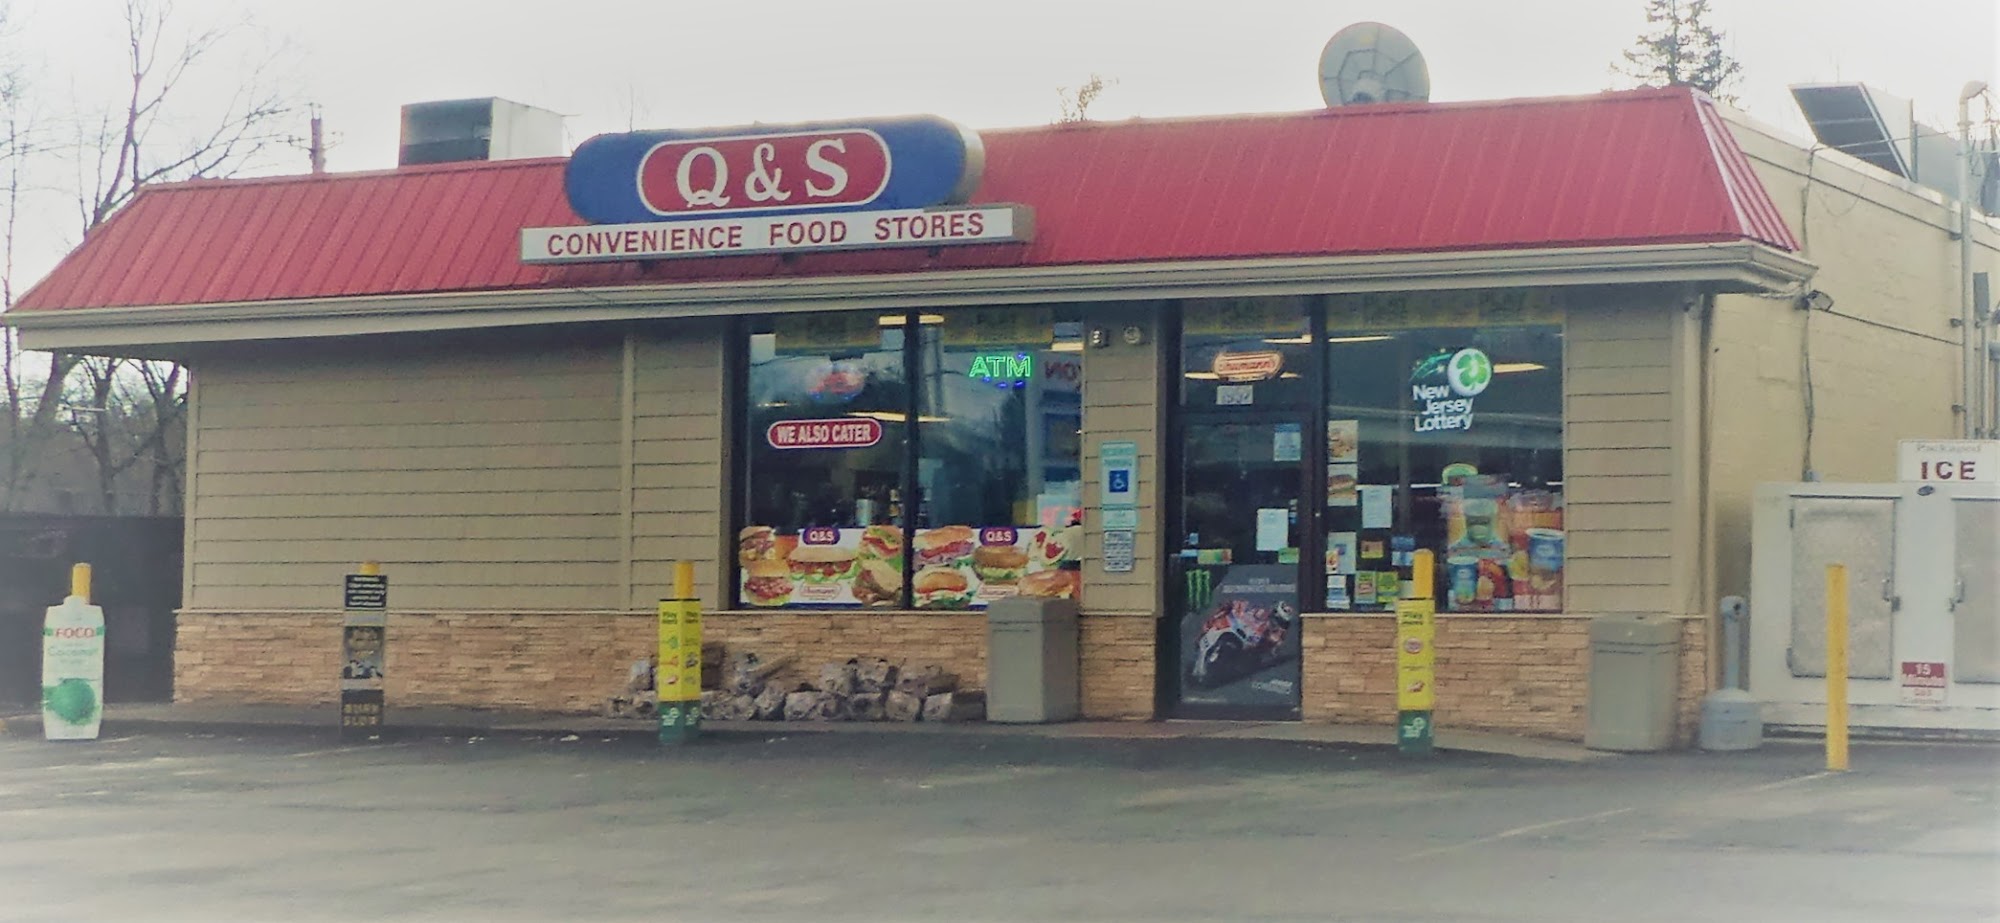 Q&S Convenience Food Store